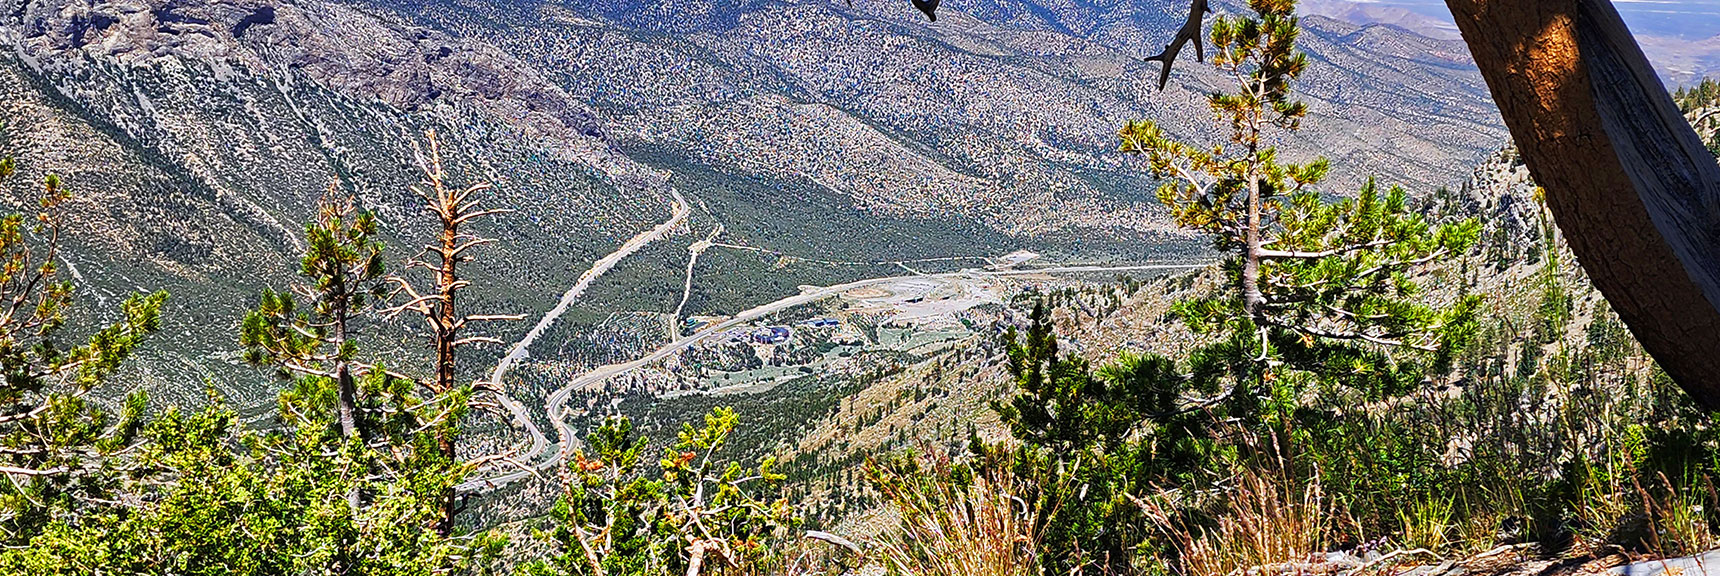 View Down to Intersection of Deer Creek & Kyle Canyon Roads from Near Harris Mt. Summit. | Fletcher Canyon to Harris Mountain Summit | Mt Charleston Wilderness, Nevada